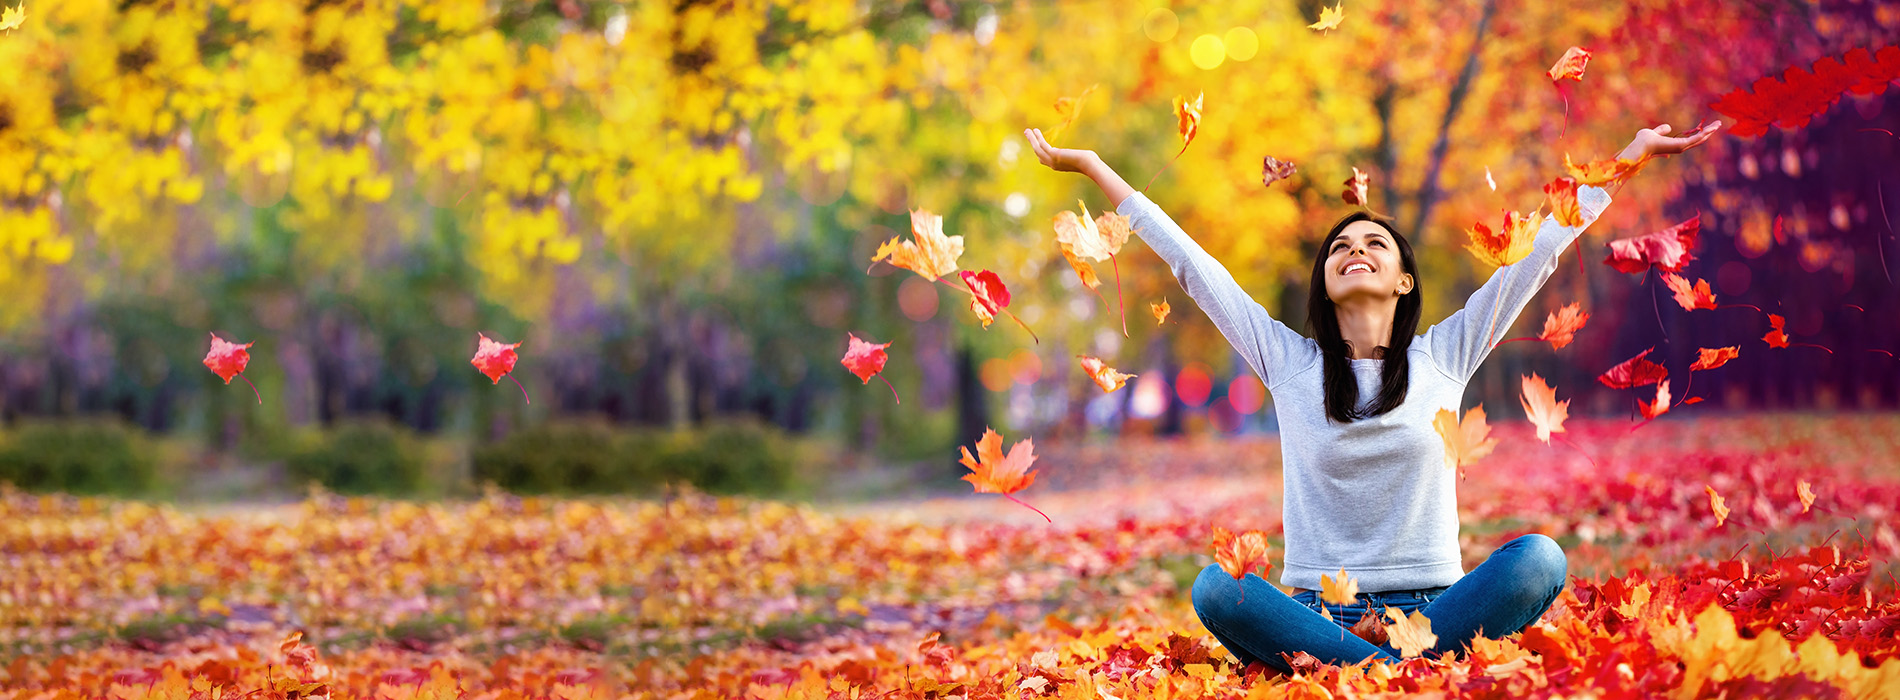 A person sitting on the ground amidst fallen autumn leaves, enjoying a moment of relaxation and happiness.